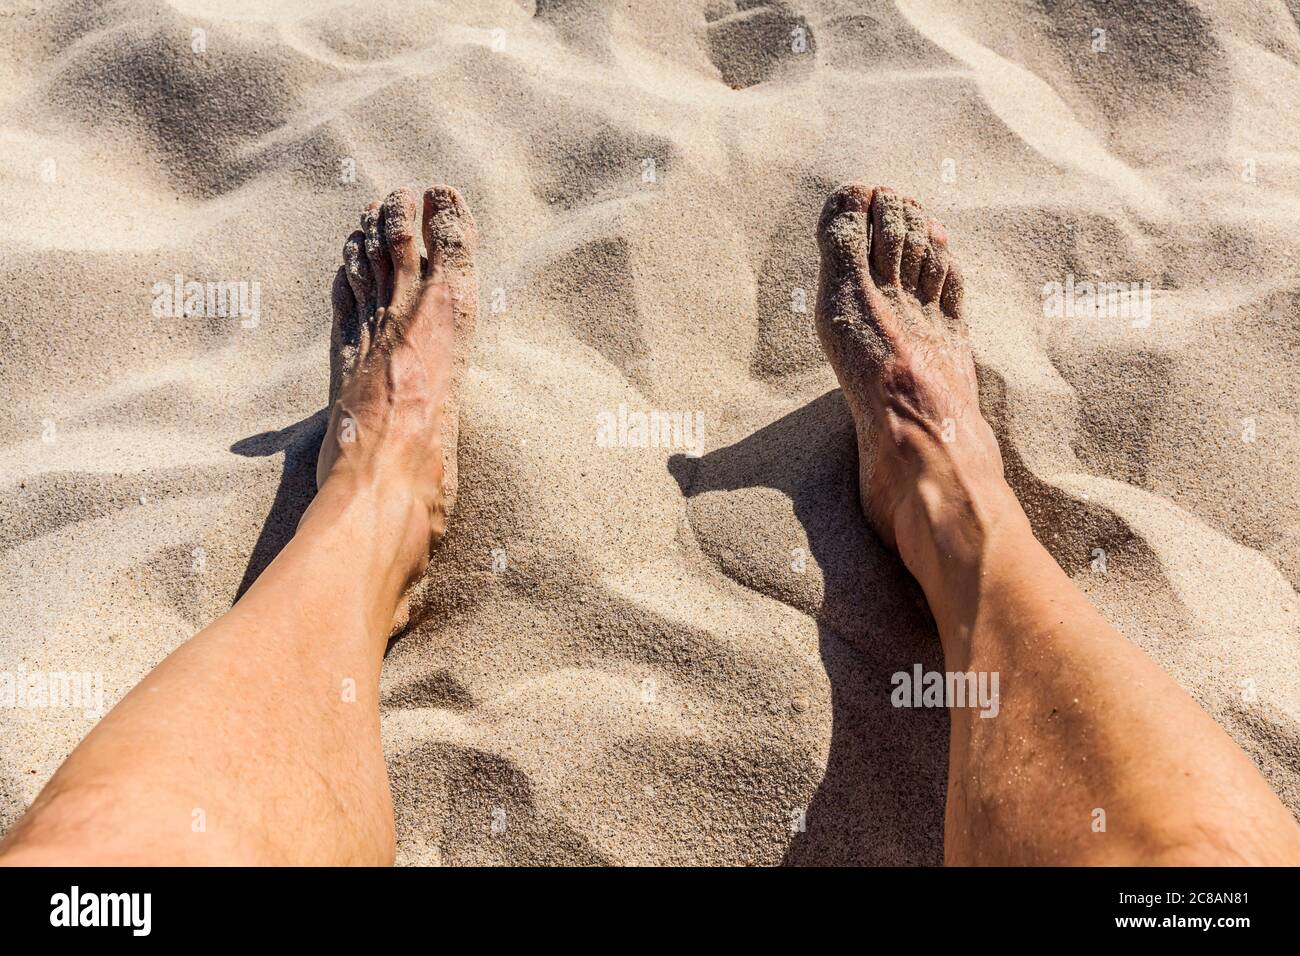 A man's feet and legs relaxing on a beach, Mexico. Stock Photo